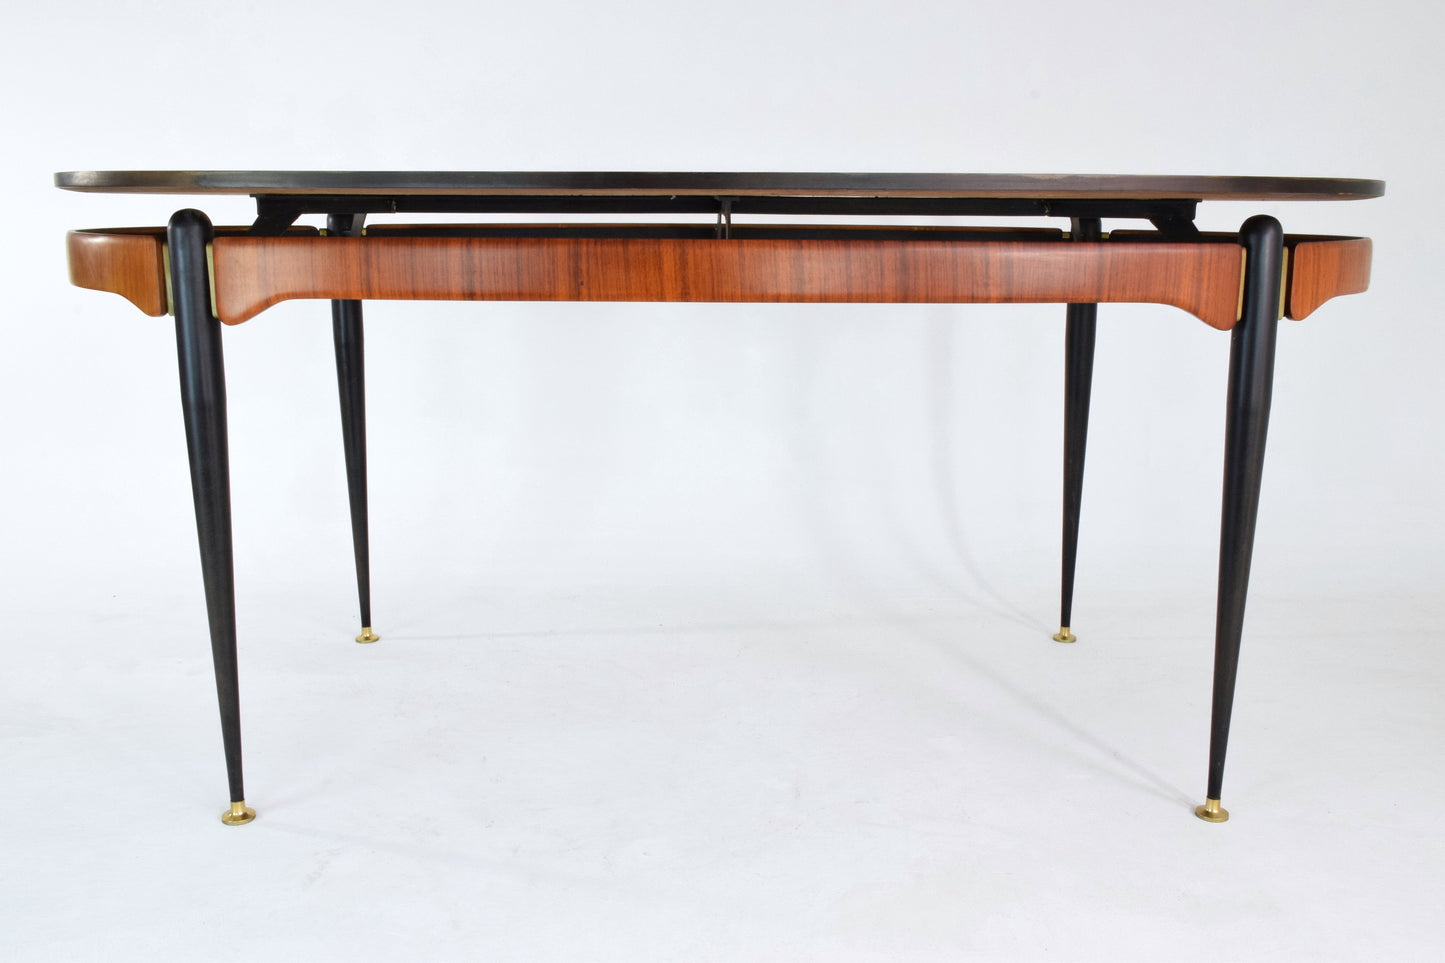 Italian Vintage Oval Rosewood Dining Table, 1950's - Spirit Gallery 